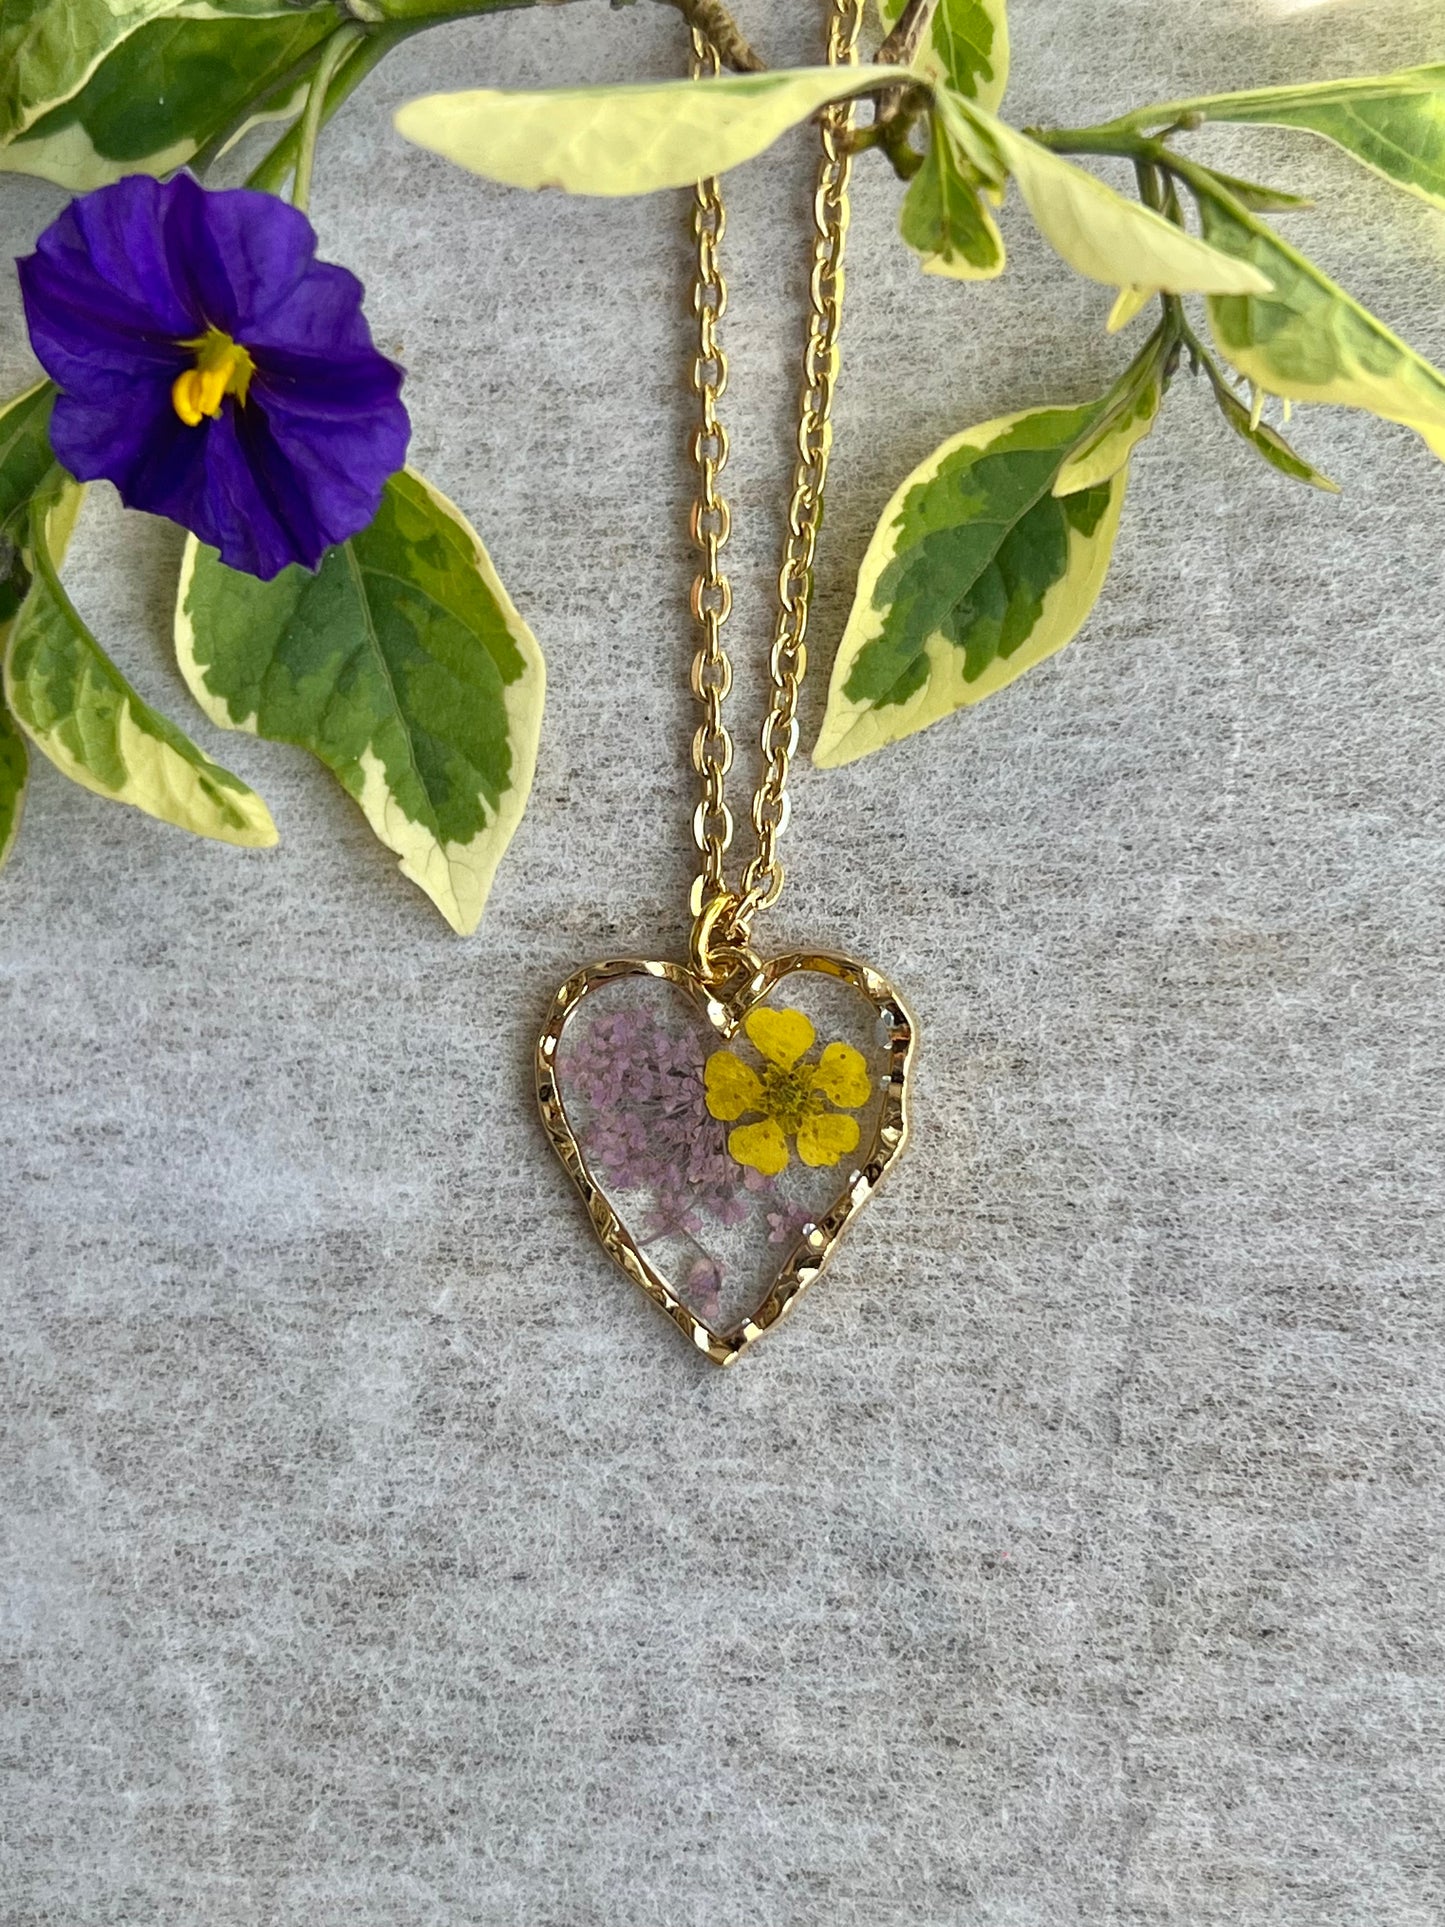 heart shape delicate light purple fynbos blast and yellow flower necklace perfect gift 